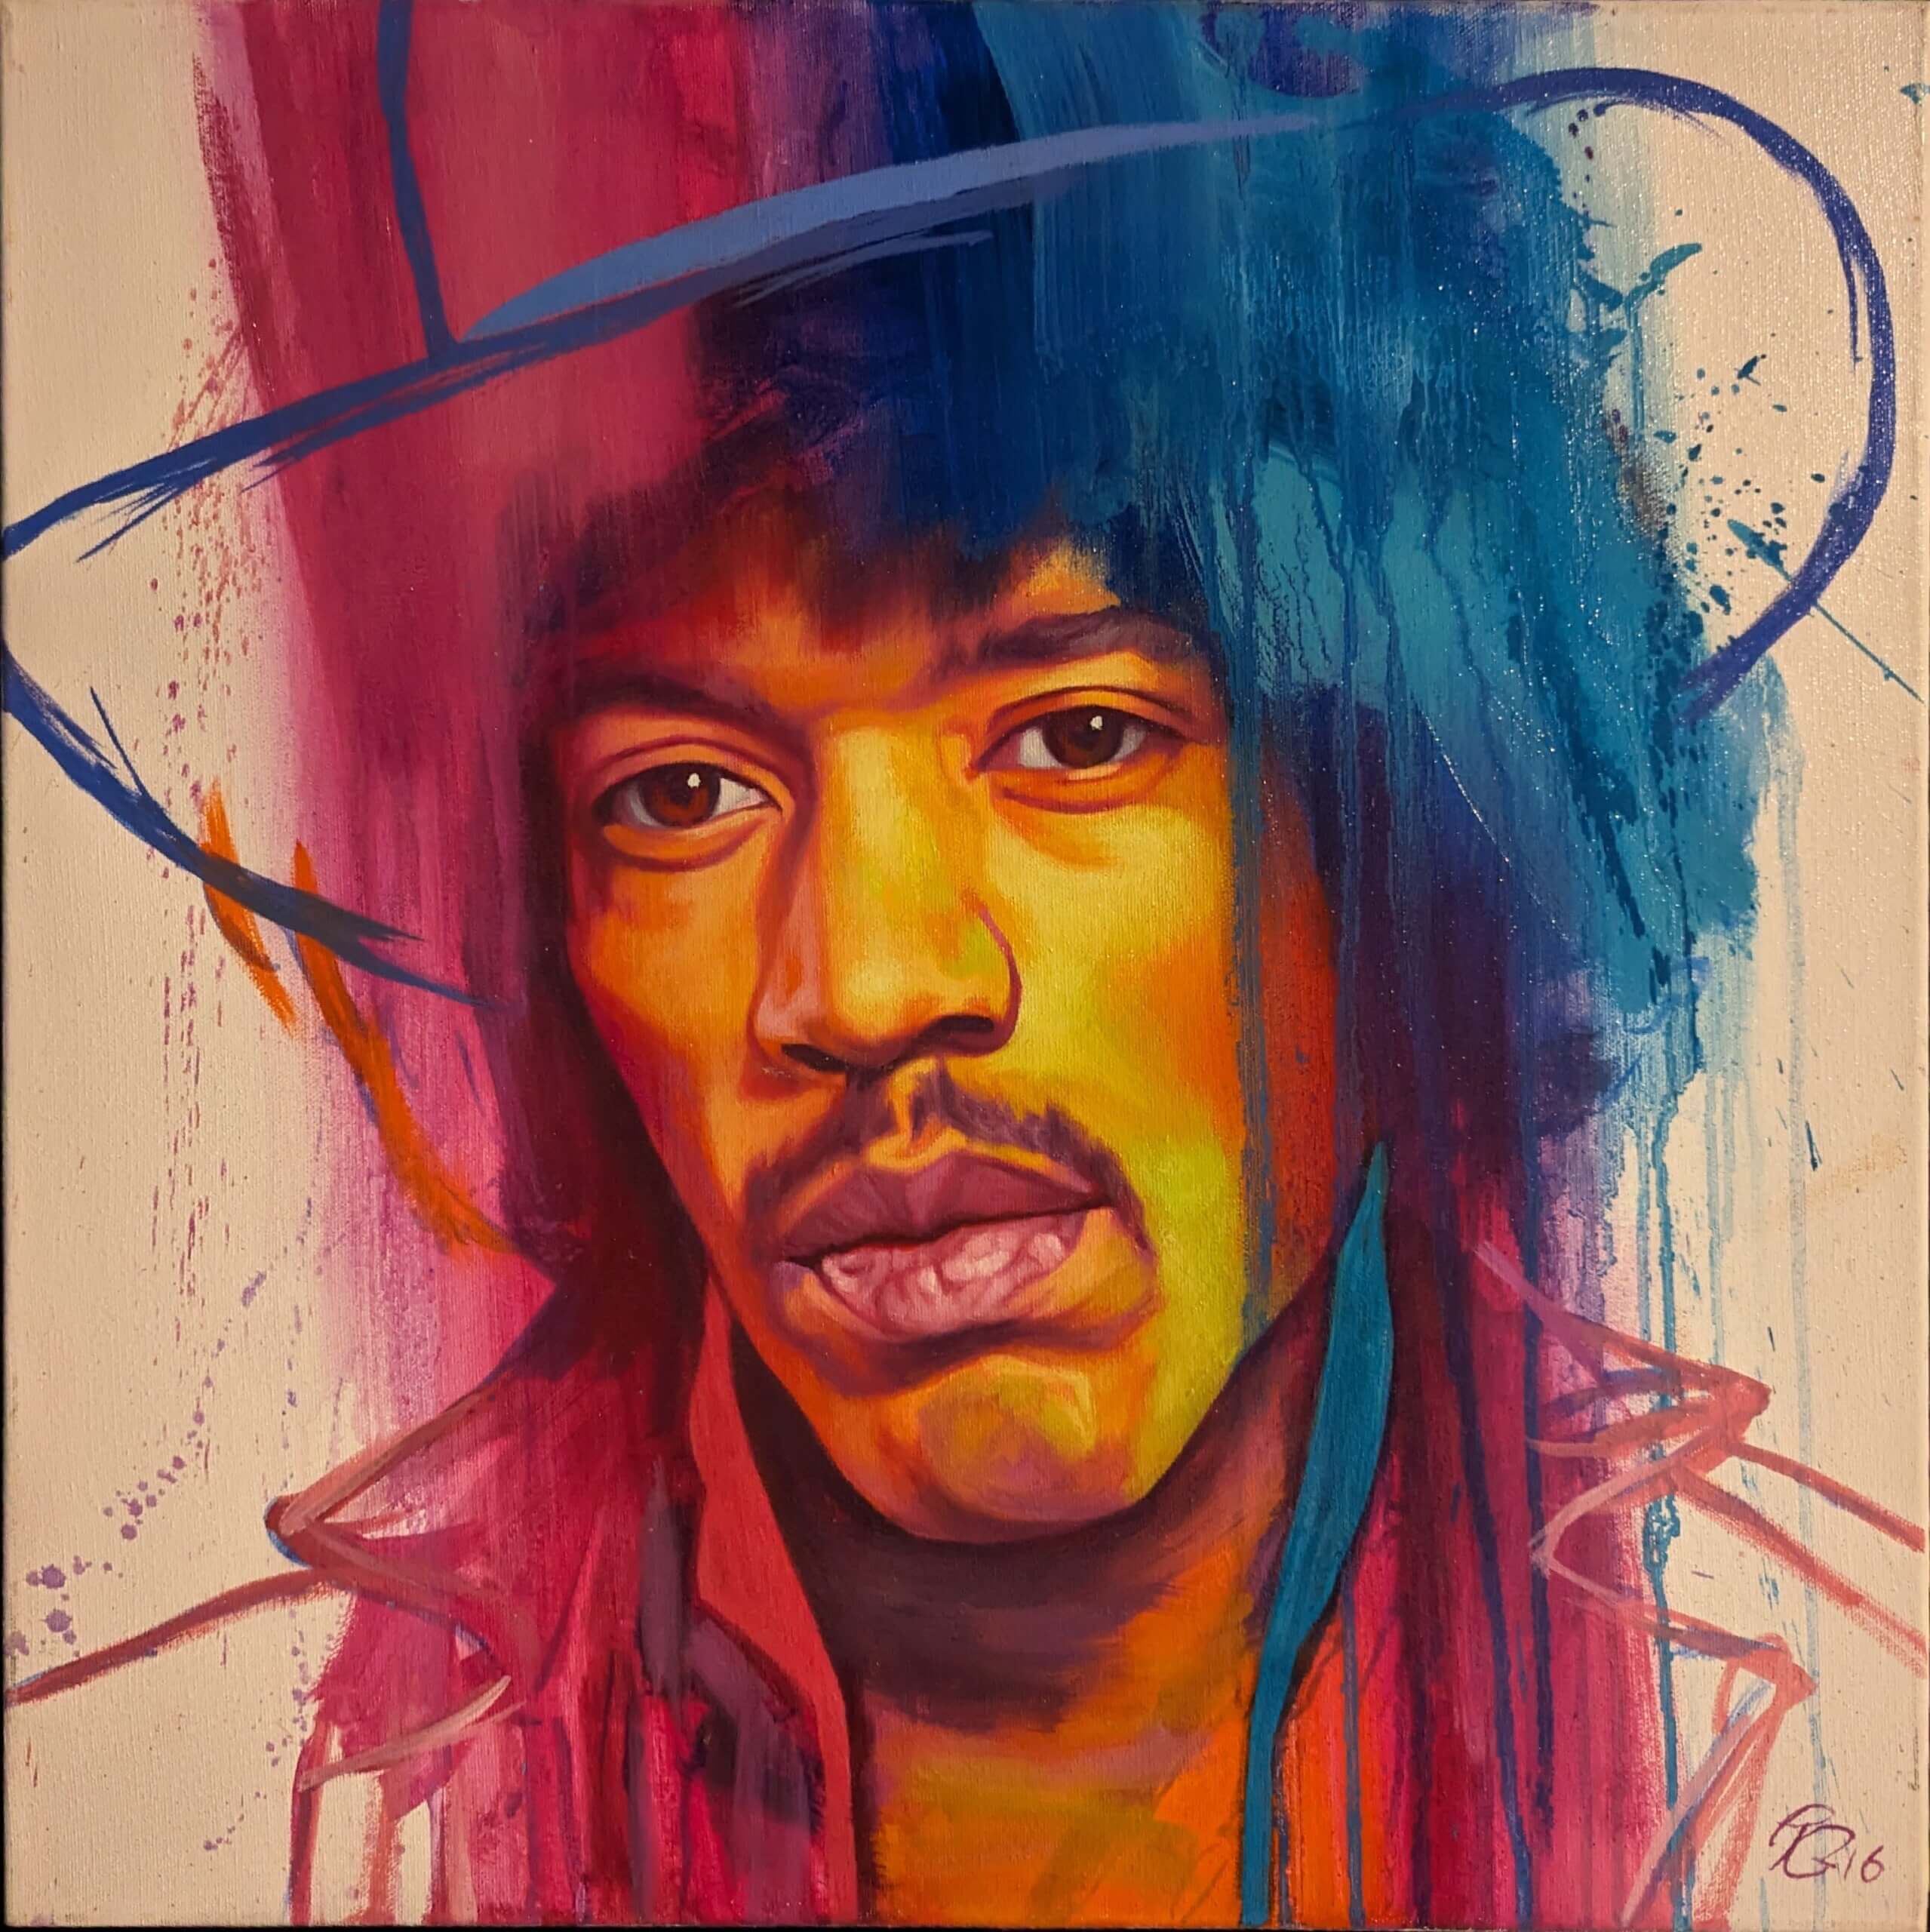 UK artist Bob Goldsborough donated music inspired artwork including this Jimi Hendrix painting to The Live Room